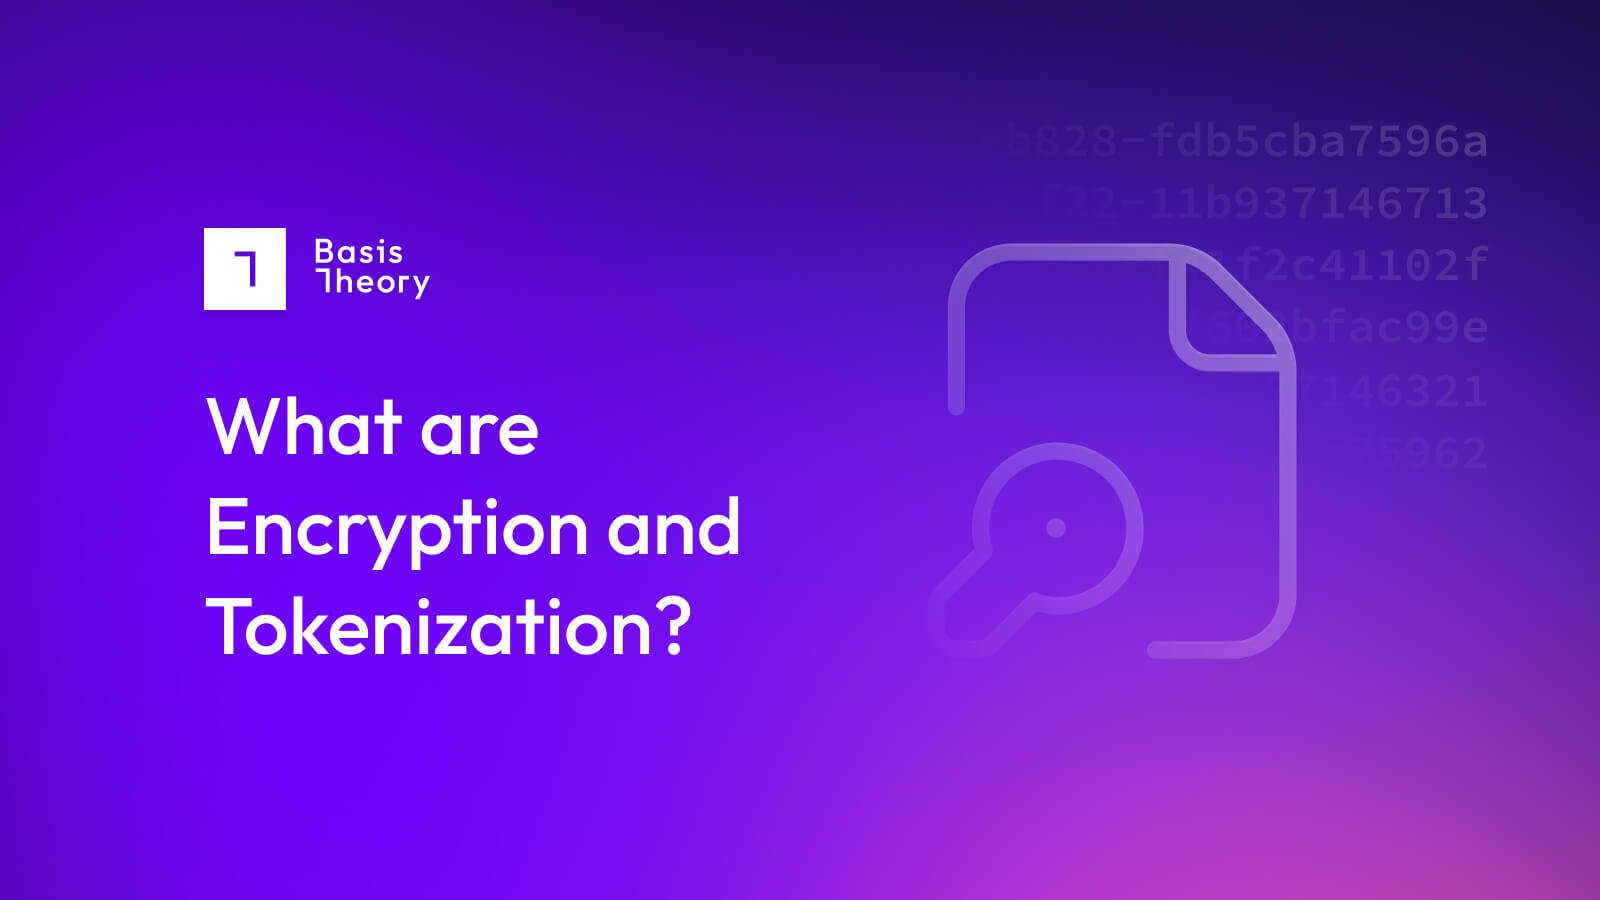 what are encryption and tokenization?